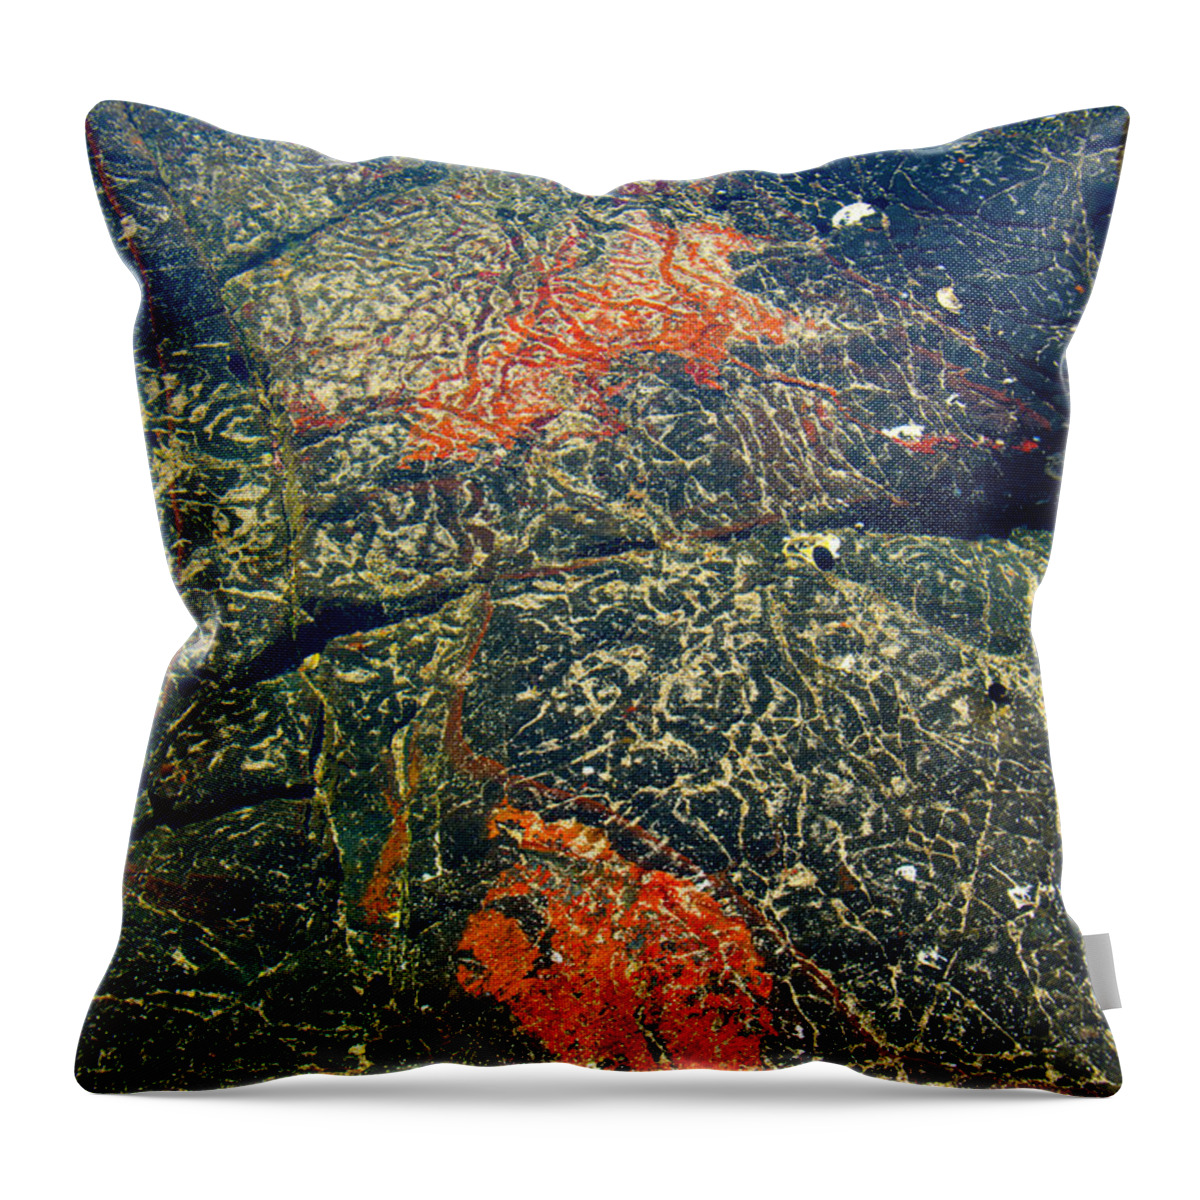 Bombo Throw Pillow featuring the photograph Rock Pool Art M by Peter Kneen